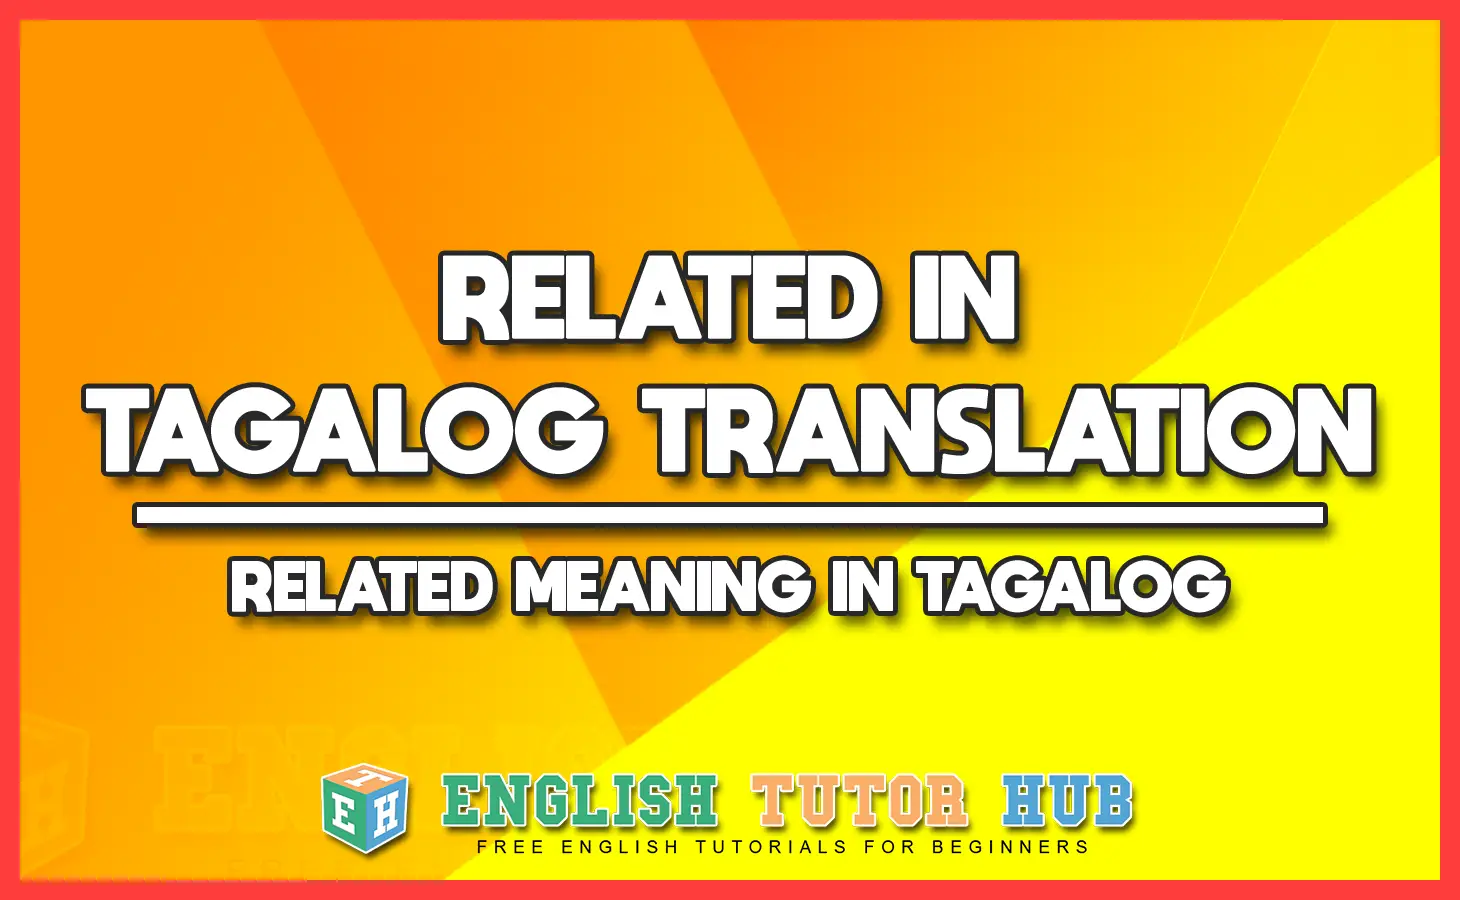 RELATED IN TAGALOG TRANSLATION - RELATED MEANING IN TAGALOG